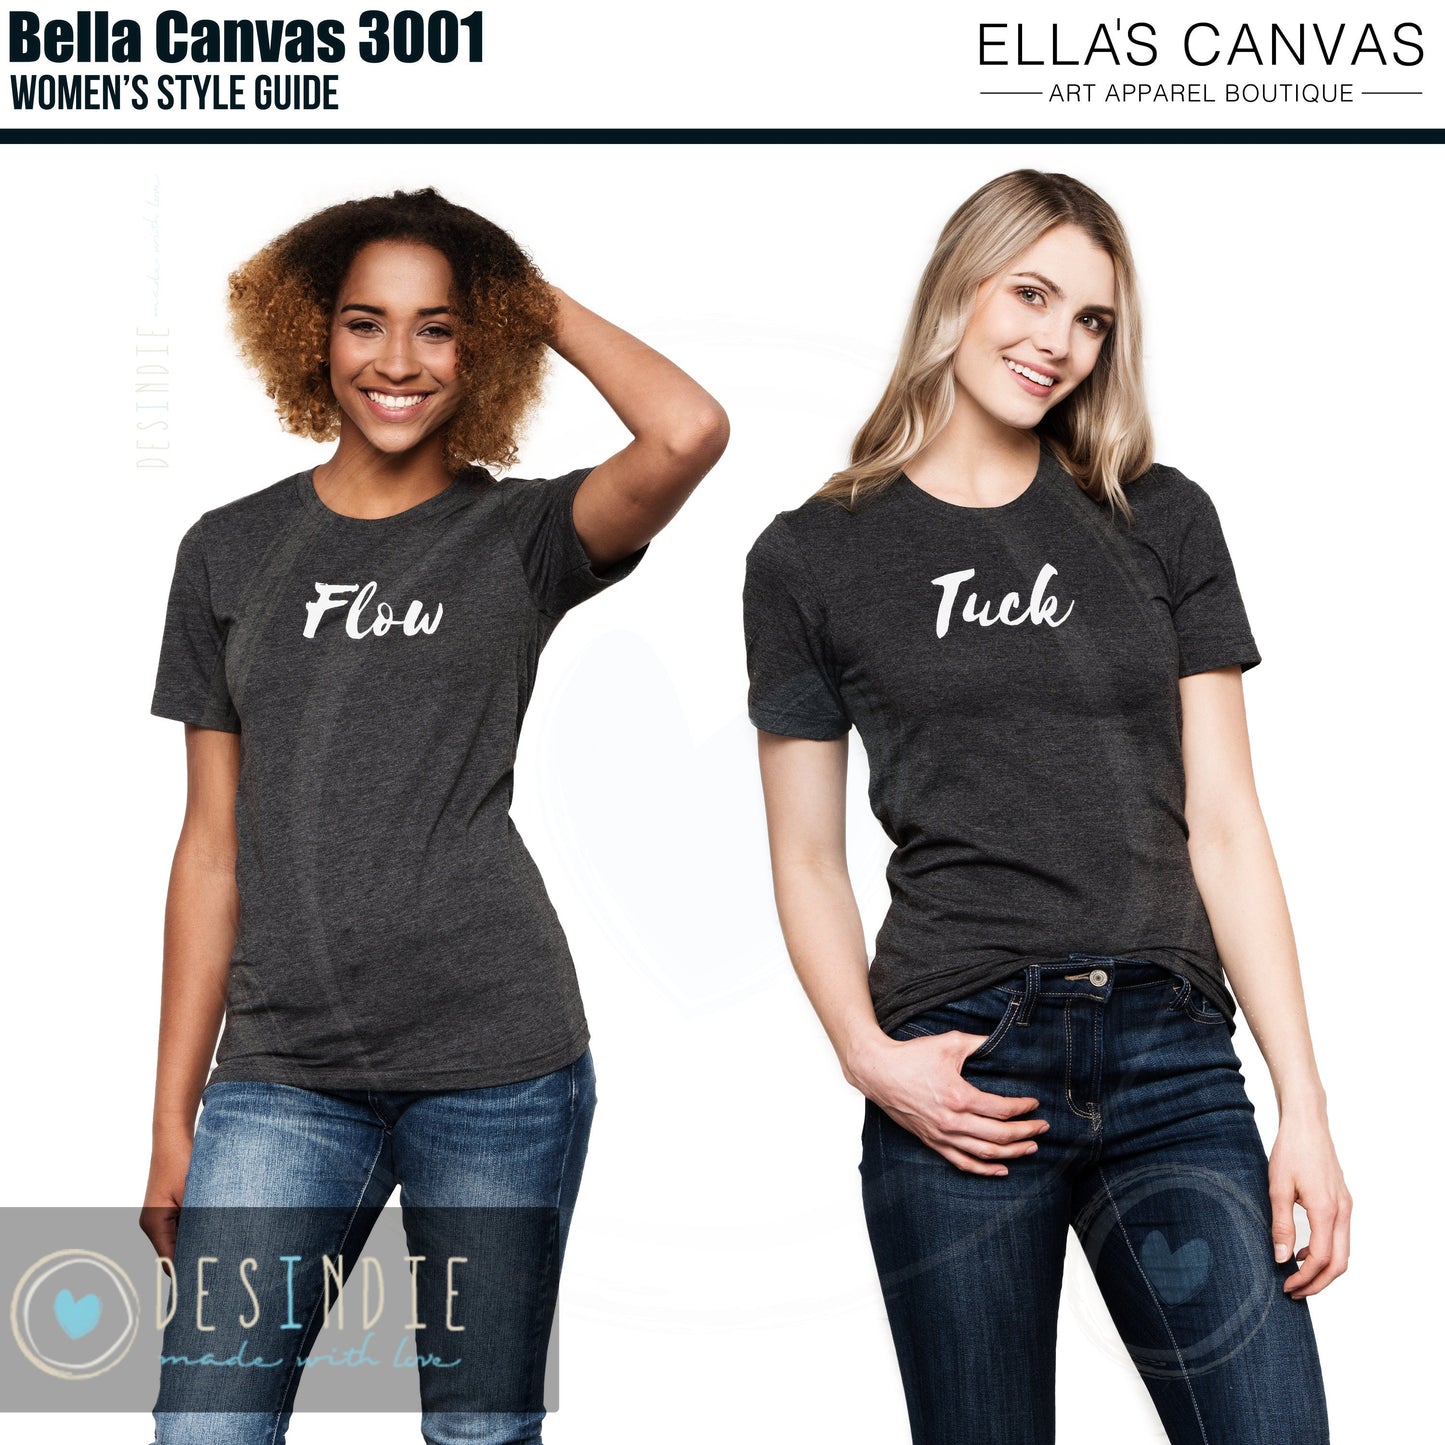 Take A Look It's In A Book, Reading, School Book Parody Graphic Tee (Unisex Bella Canvas for Women / Men)